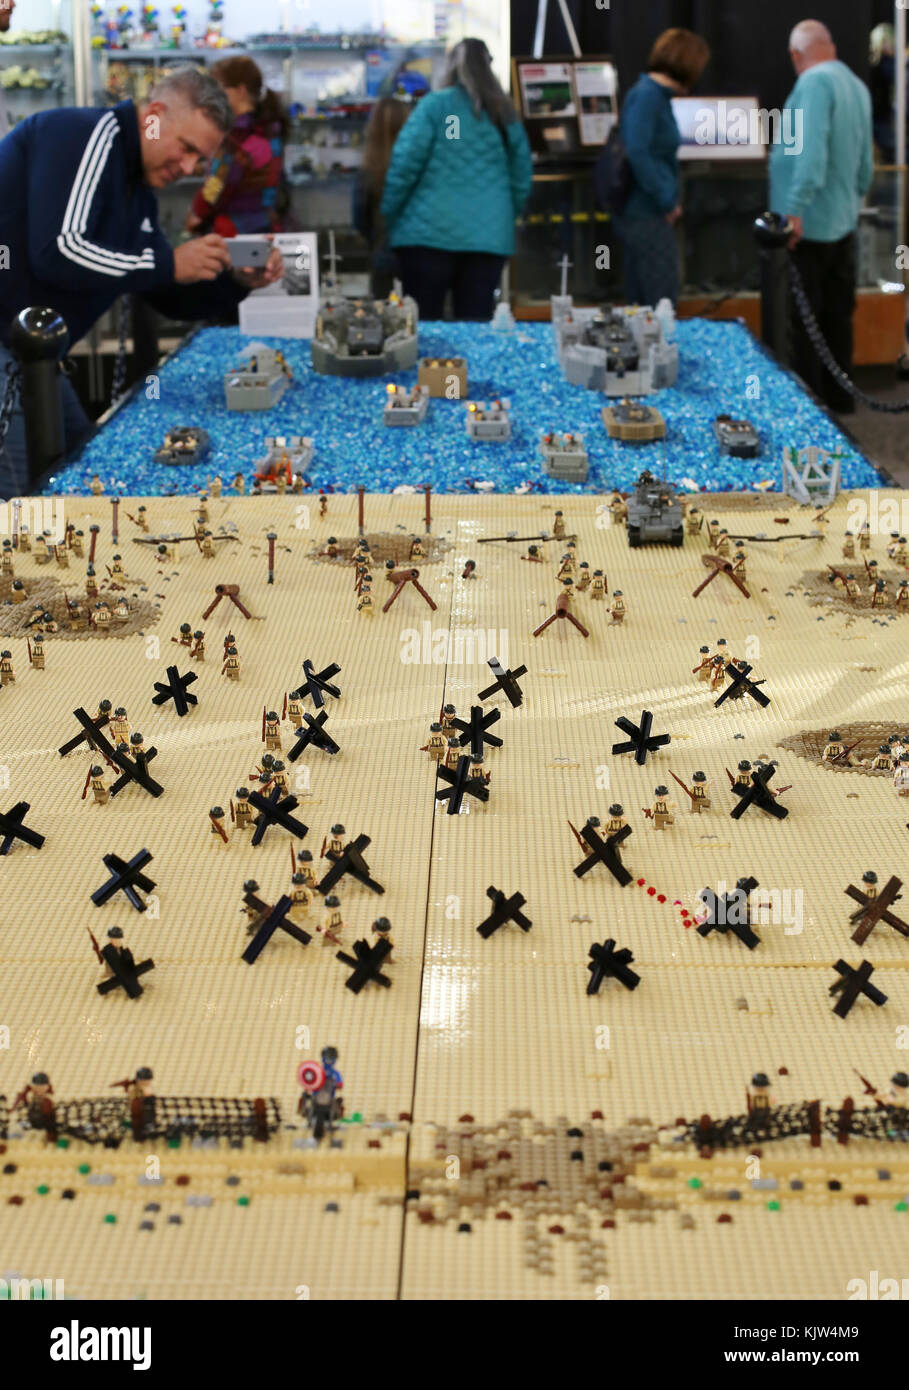 Minneapolis, Minnesota, USA. 25th November, 2017. A man takes a picture of  the invasion at Omaha Beach, recreated entirely of LEGO bricks, on display  at the LEGO Fan Expo in Minneapolis, Minnesota.